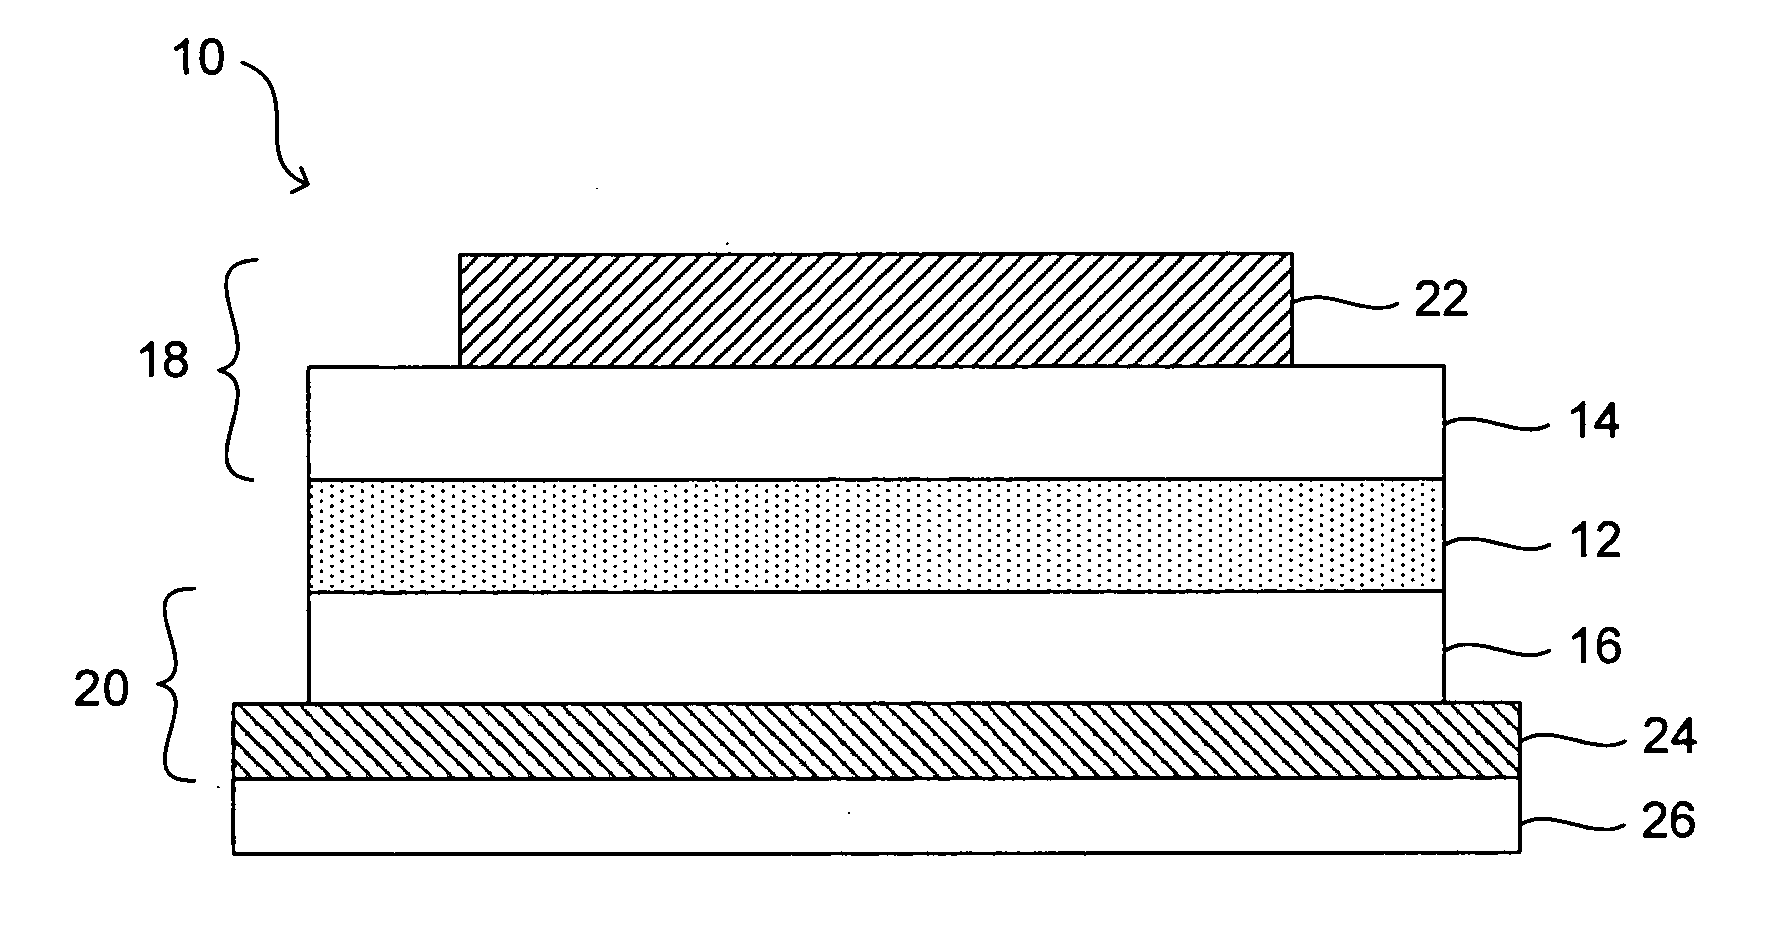 Nanostructure based light emitting devices and associated methods